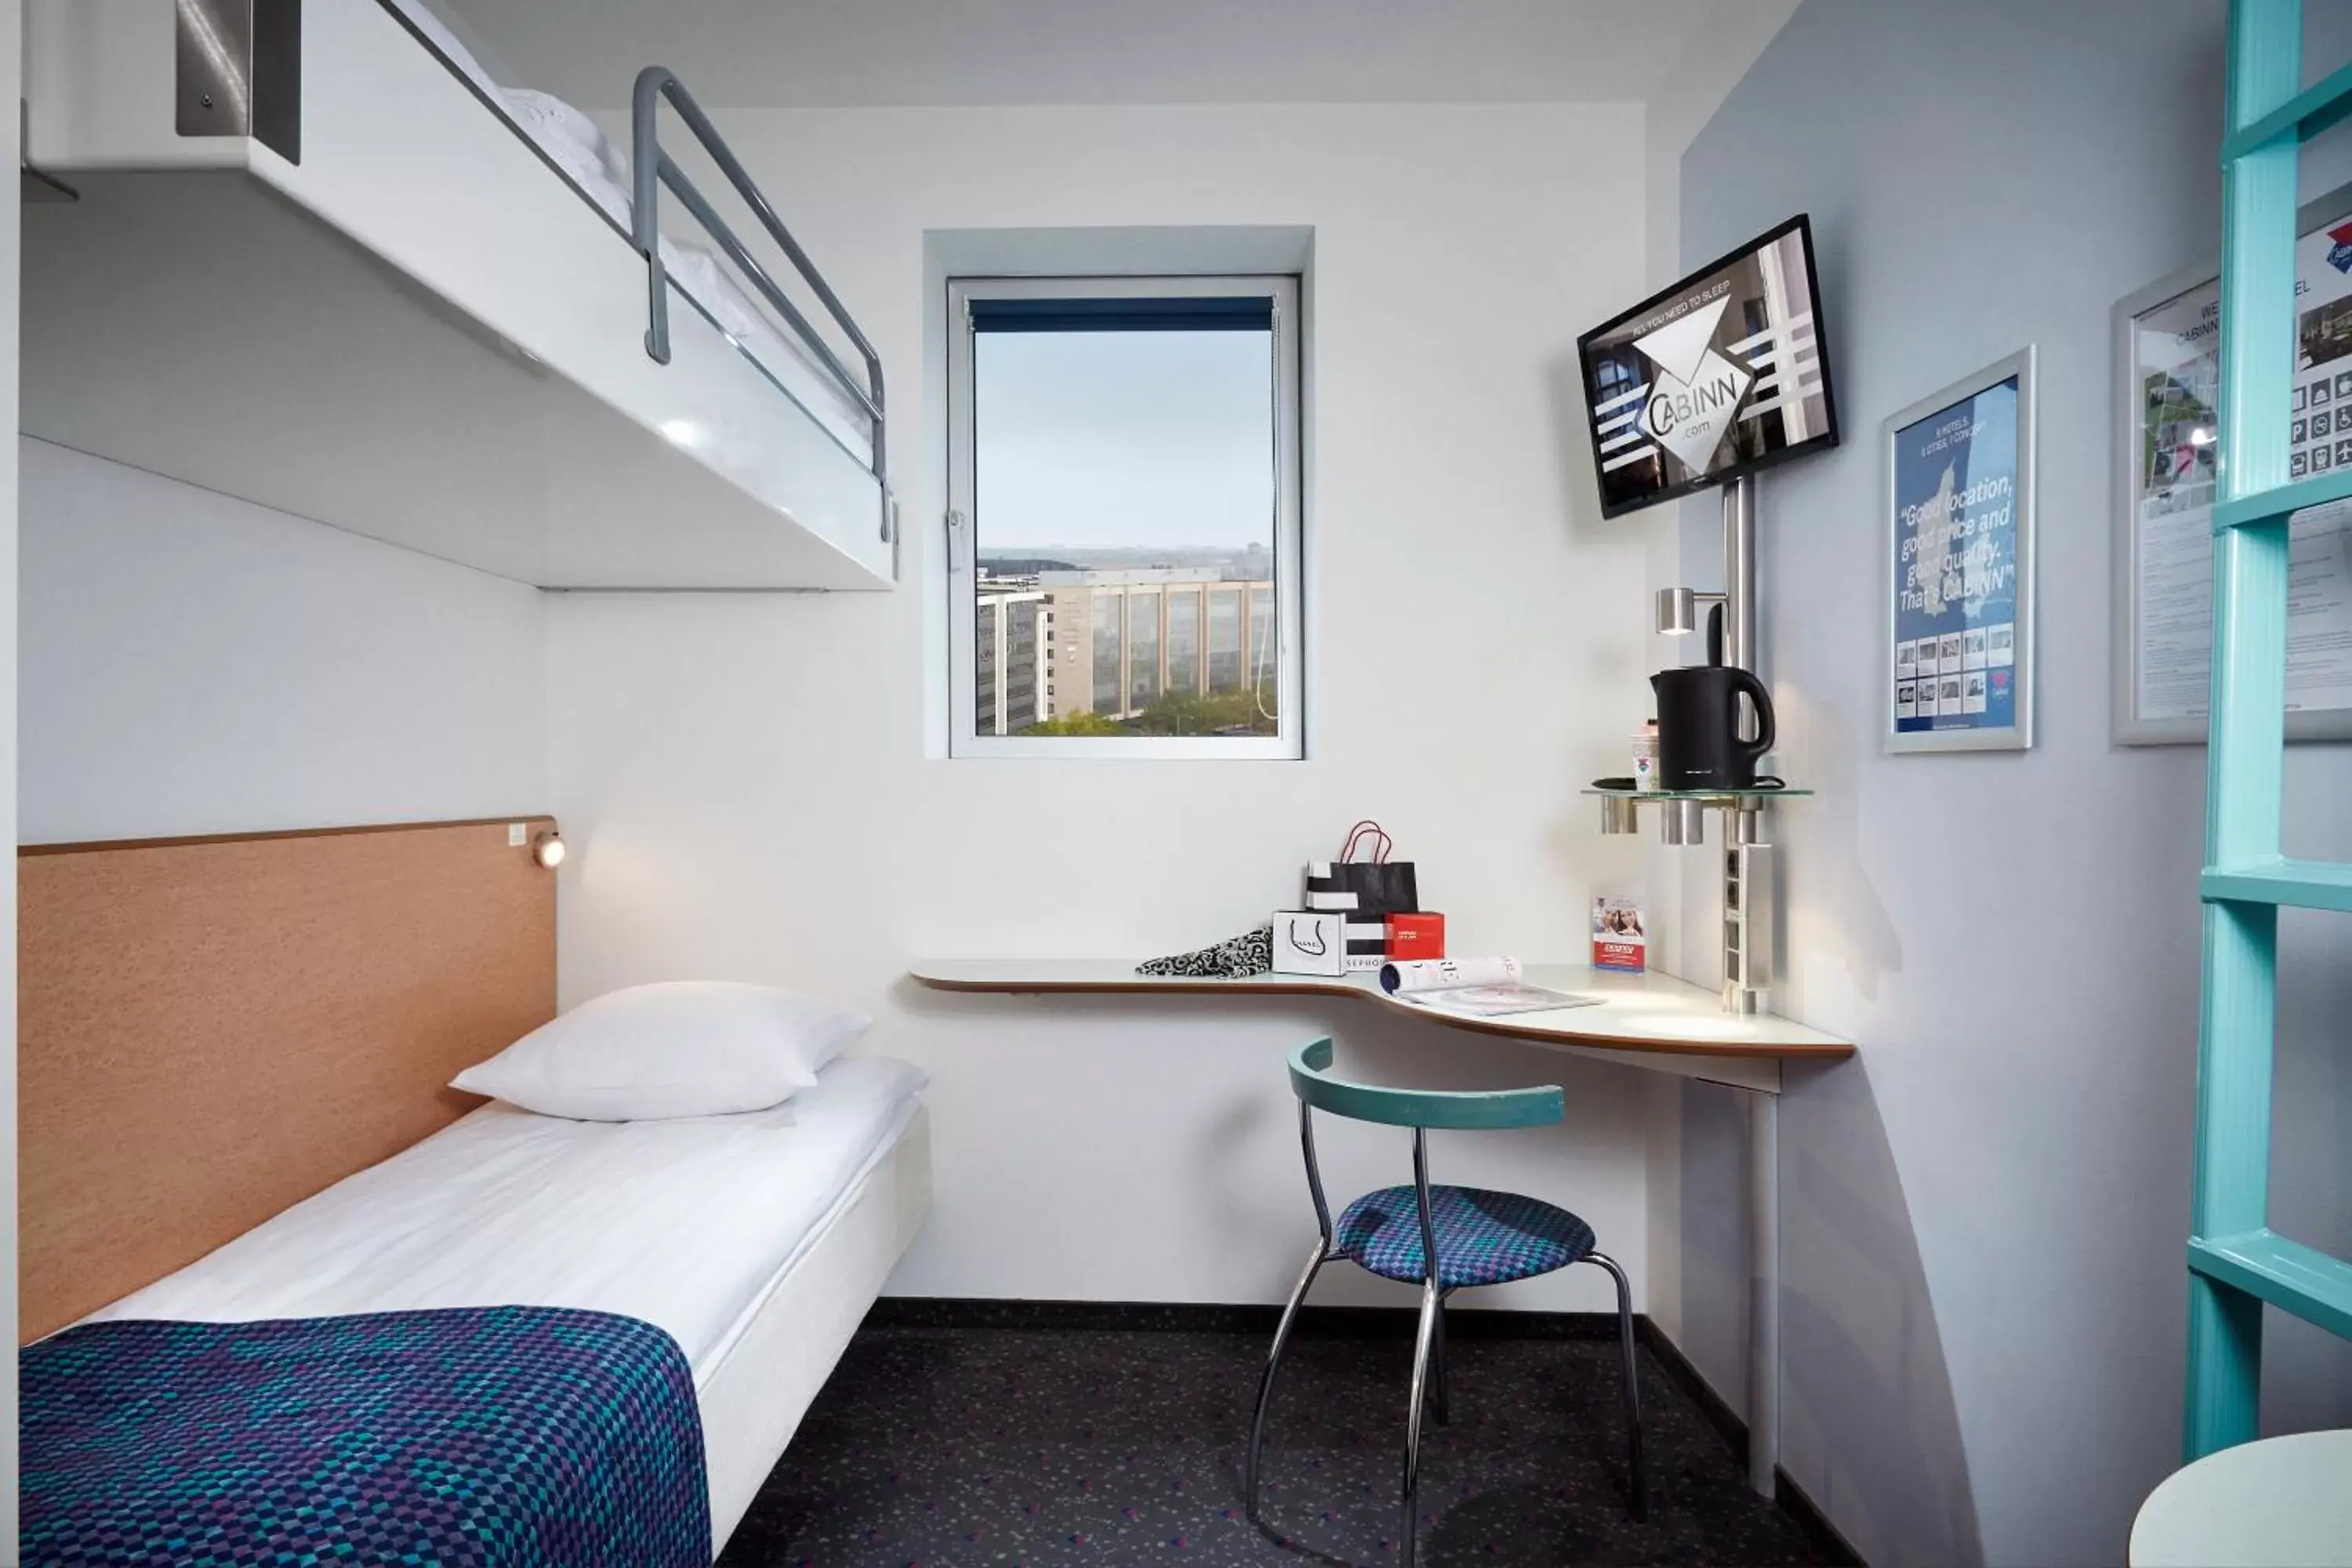 Economy Room with Bunk Beds in Cabinn Metro